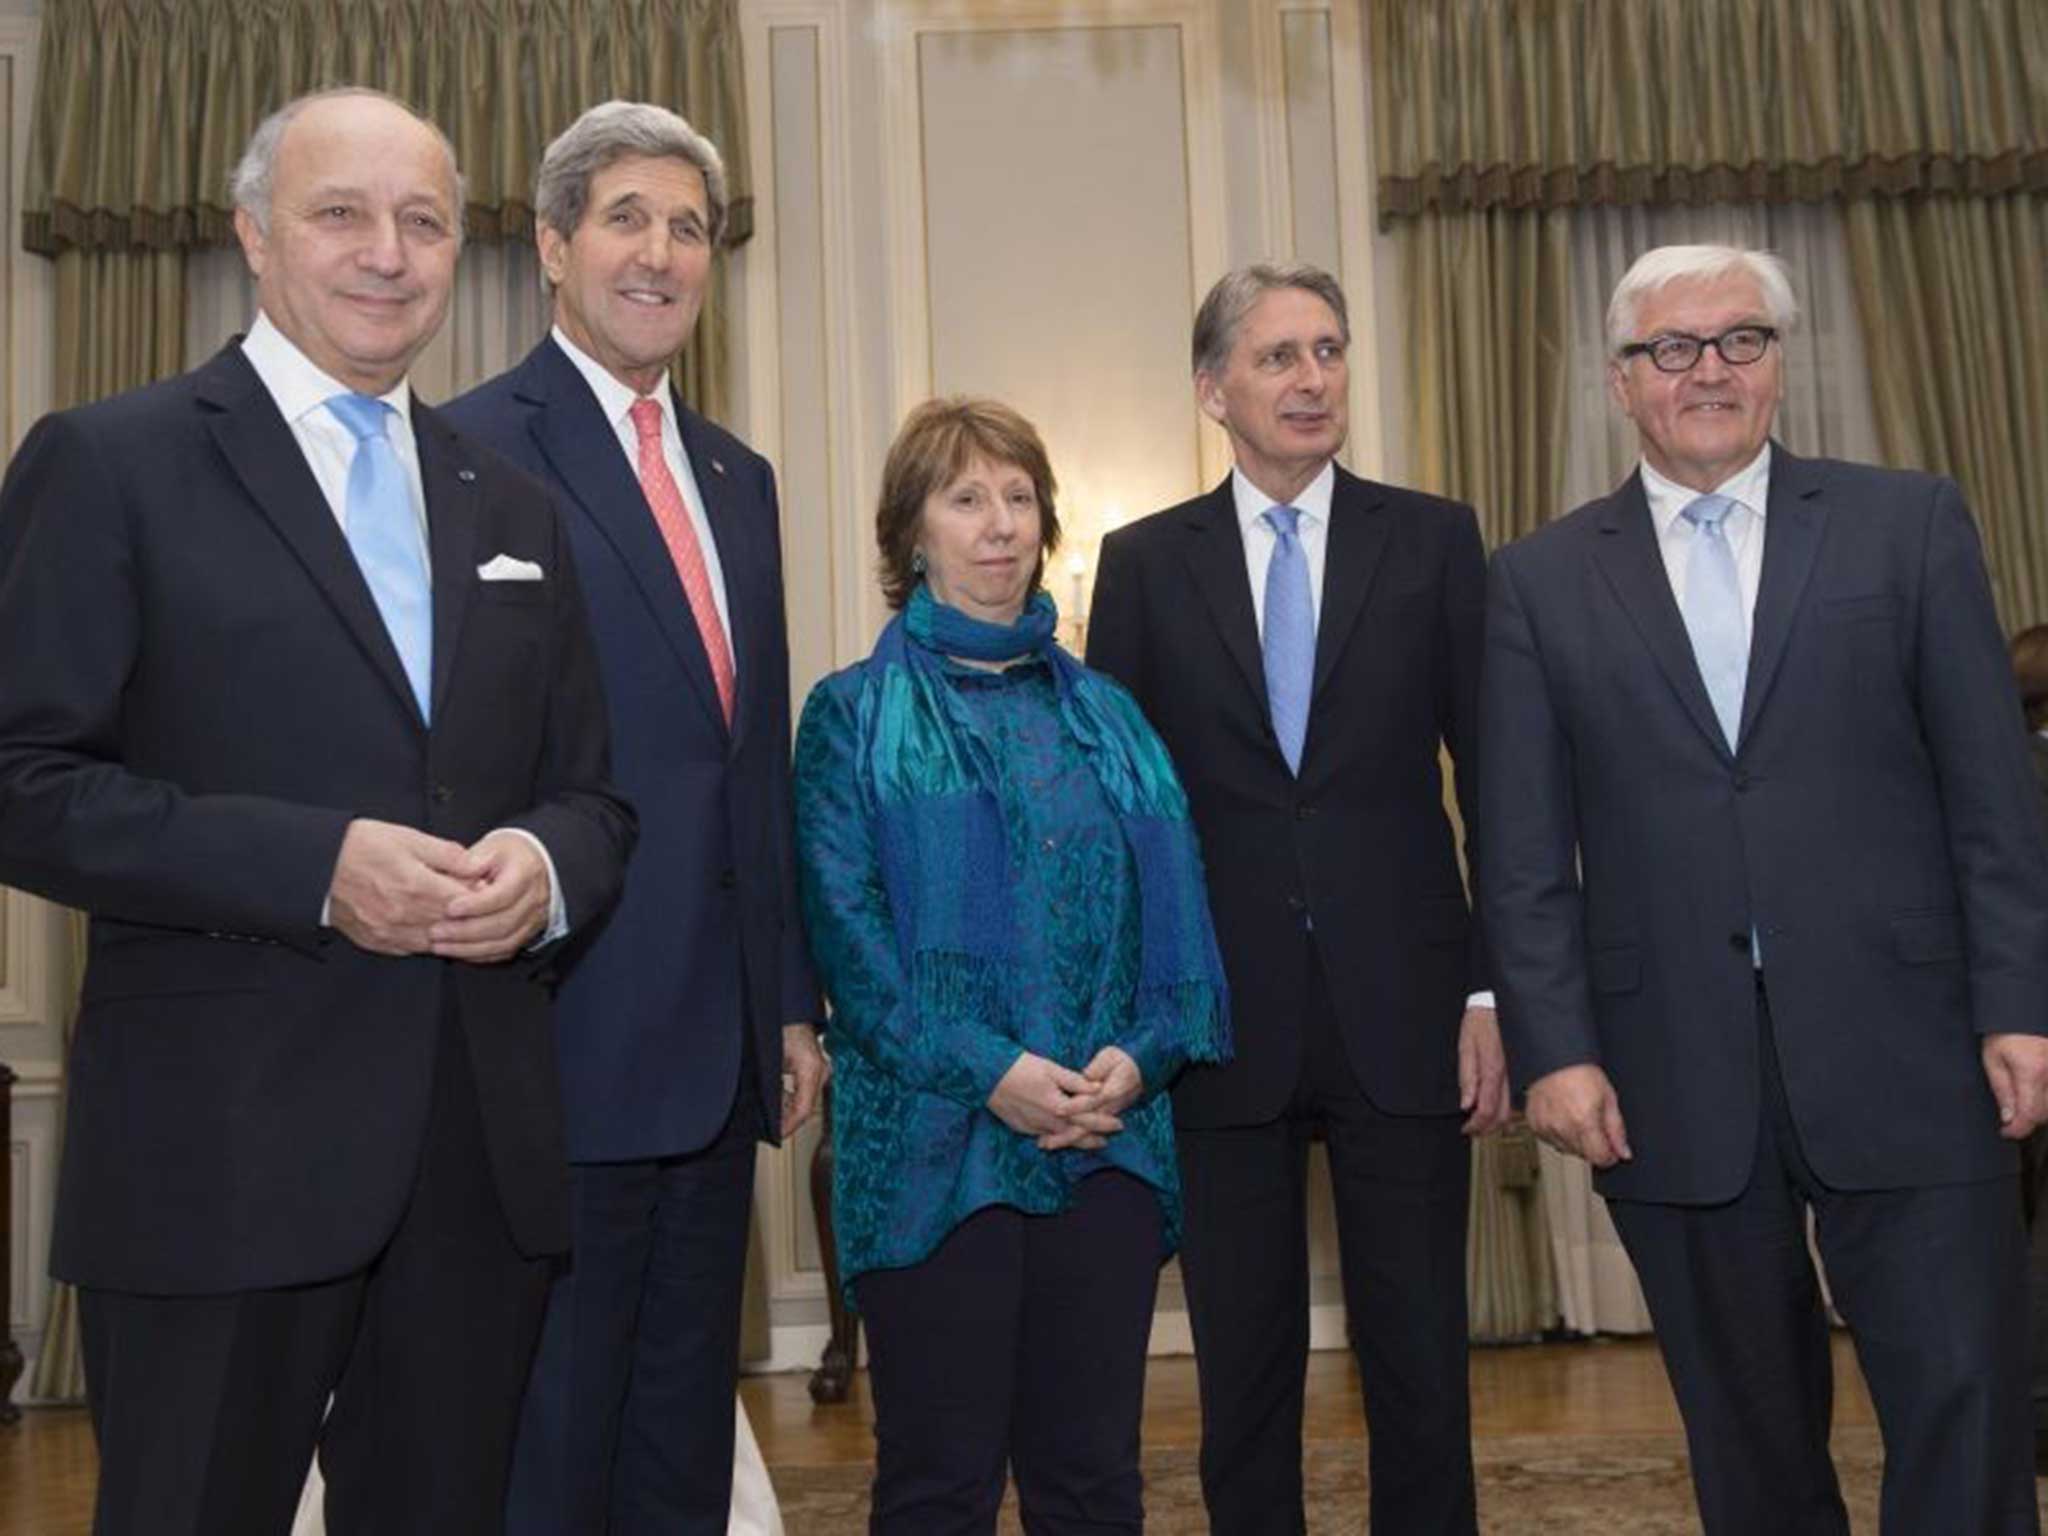 French Foreign Minister Laurent Fabius, US State Secretary John Kerry, former European Union (EU) foreign policy chief Catherine Ashton, British Foreign Secretary Philip Hammond and German Foreign Minister Frank-Walter Steinmeier (L-R)